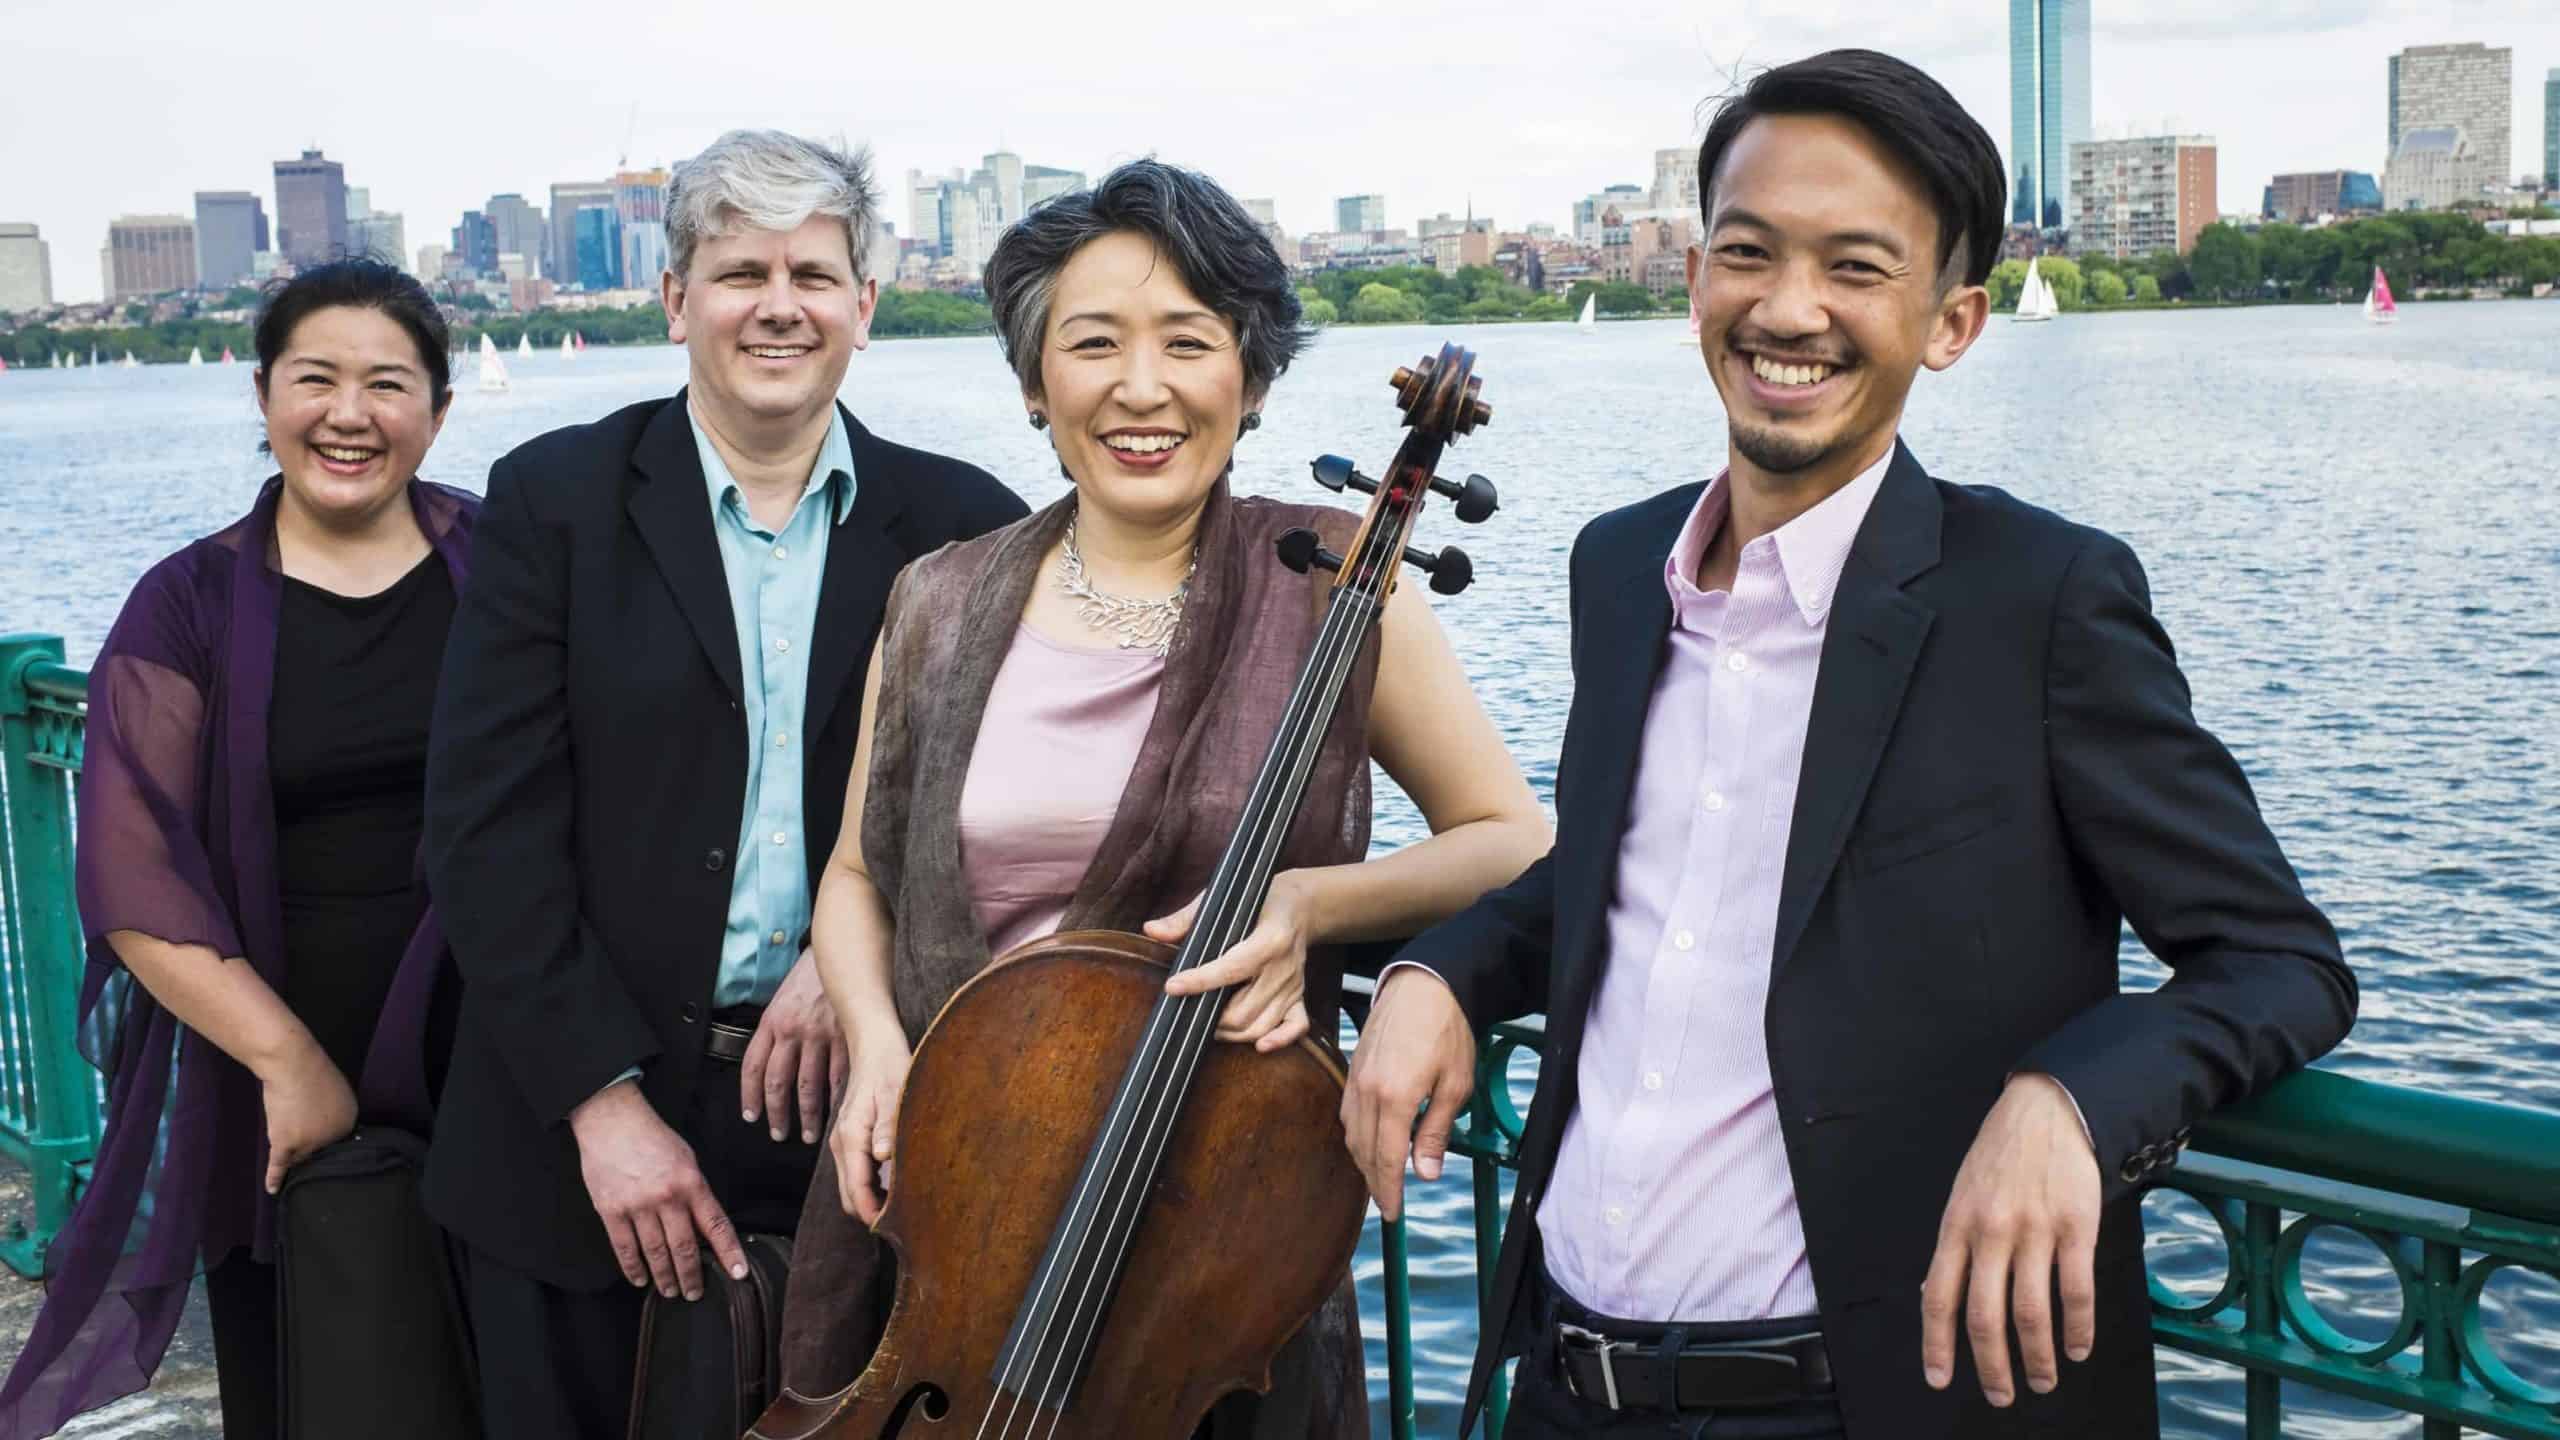 The Borromeo String Quartet will perform with Close Encounters with Music. Photo courtesy of the artists.